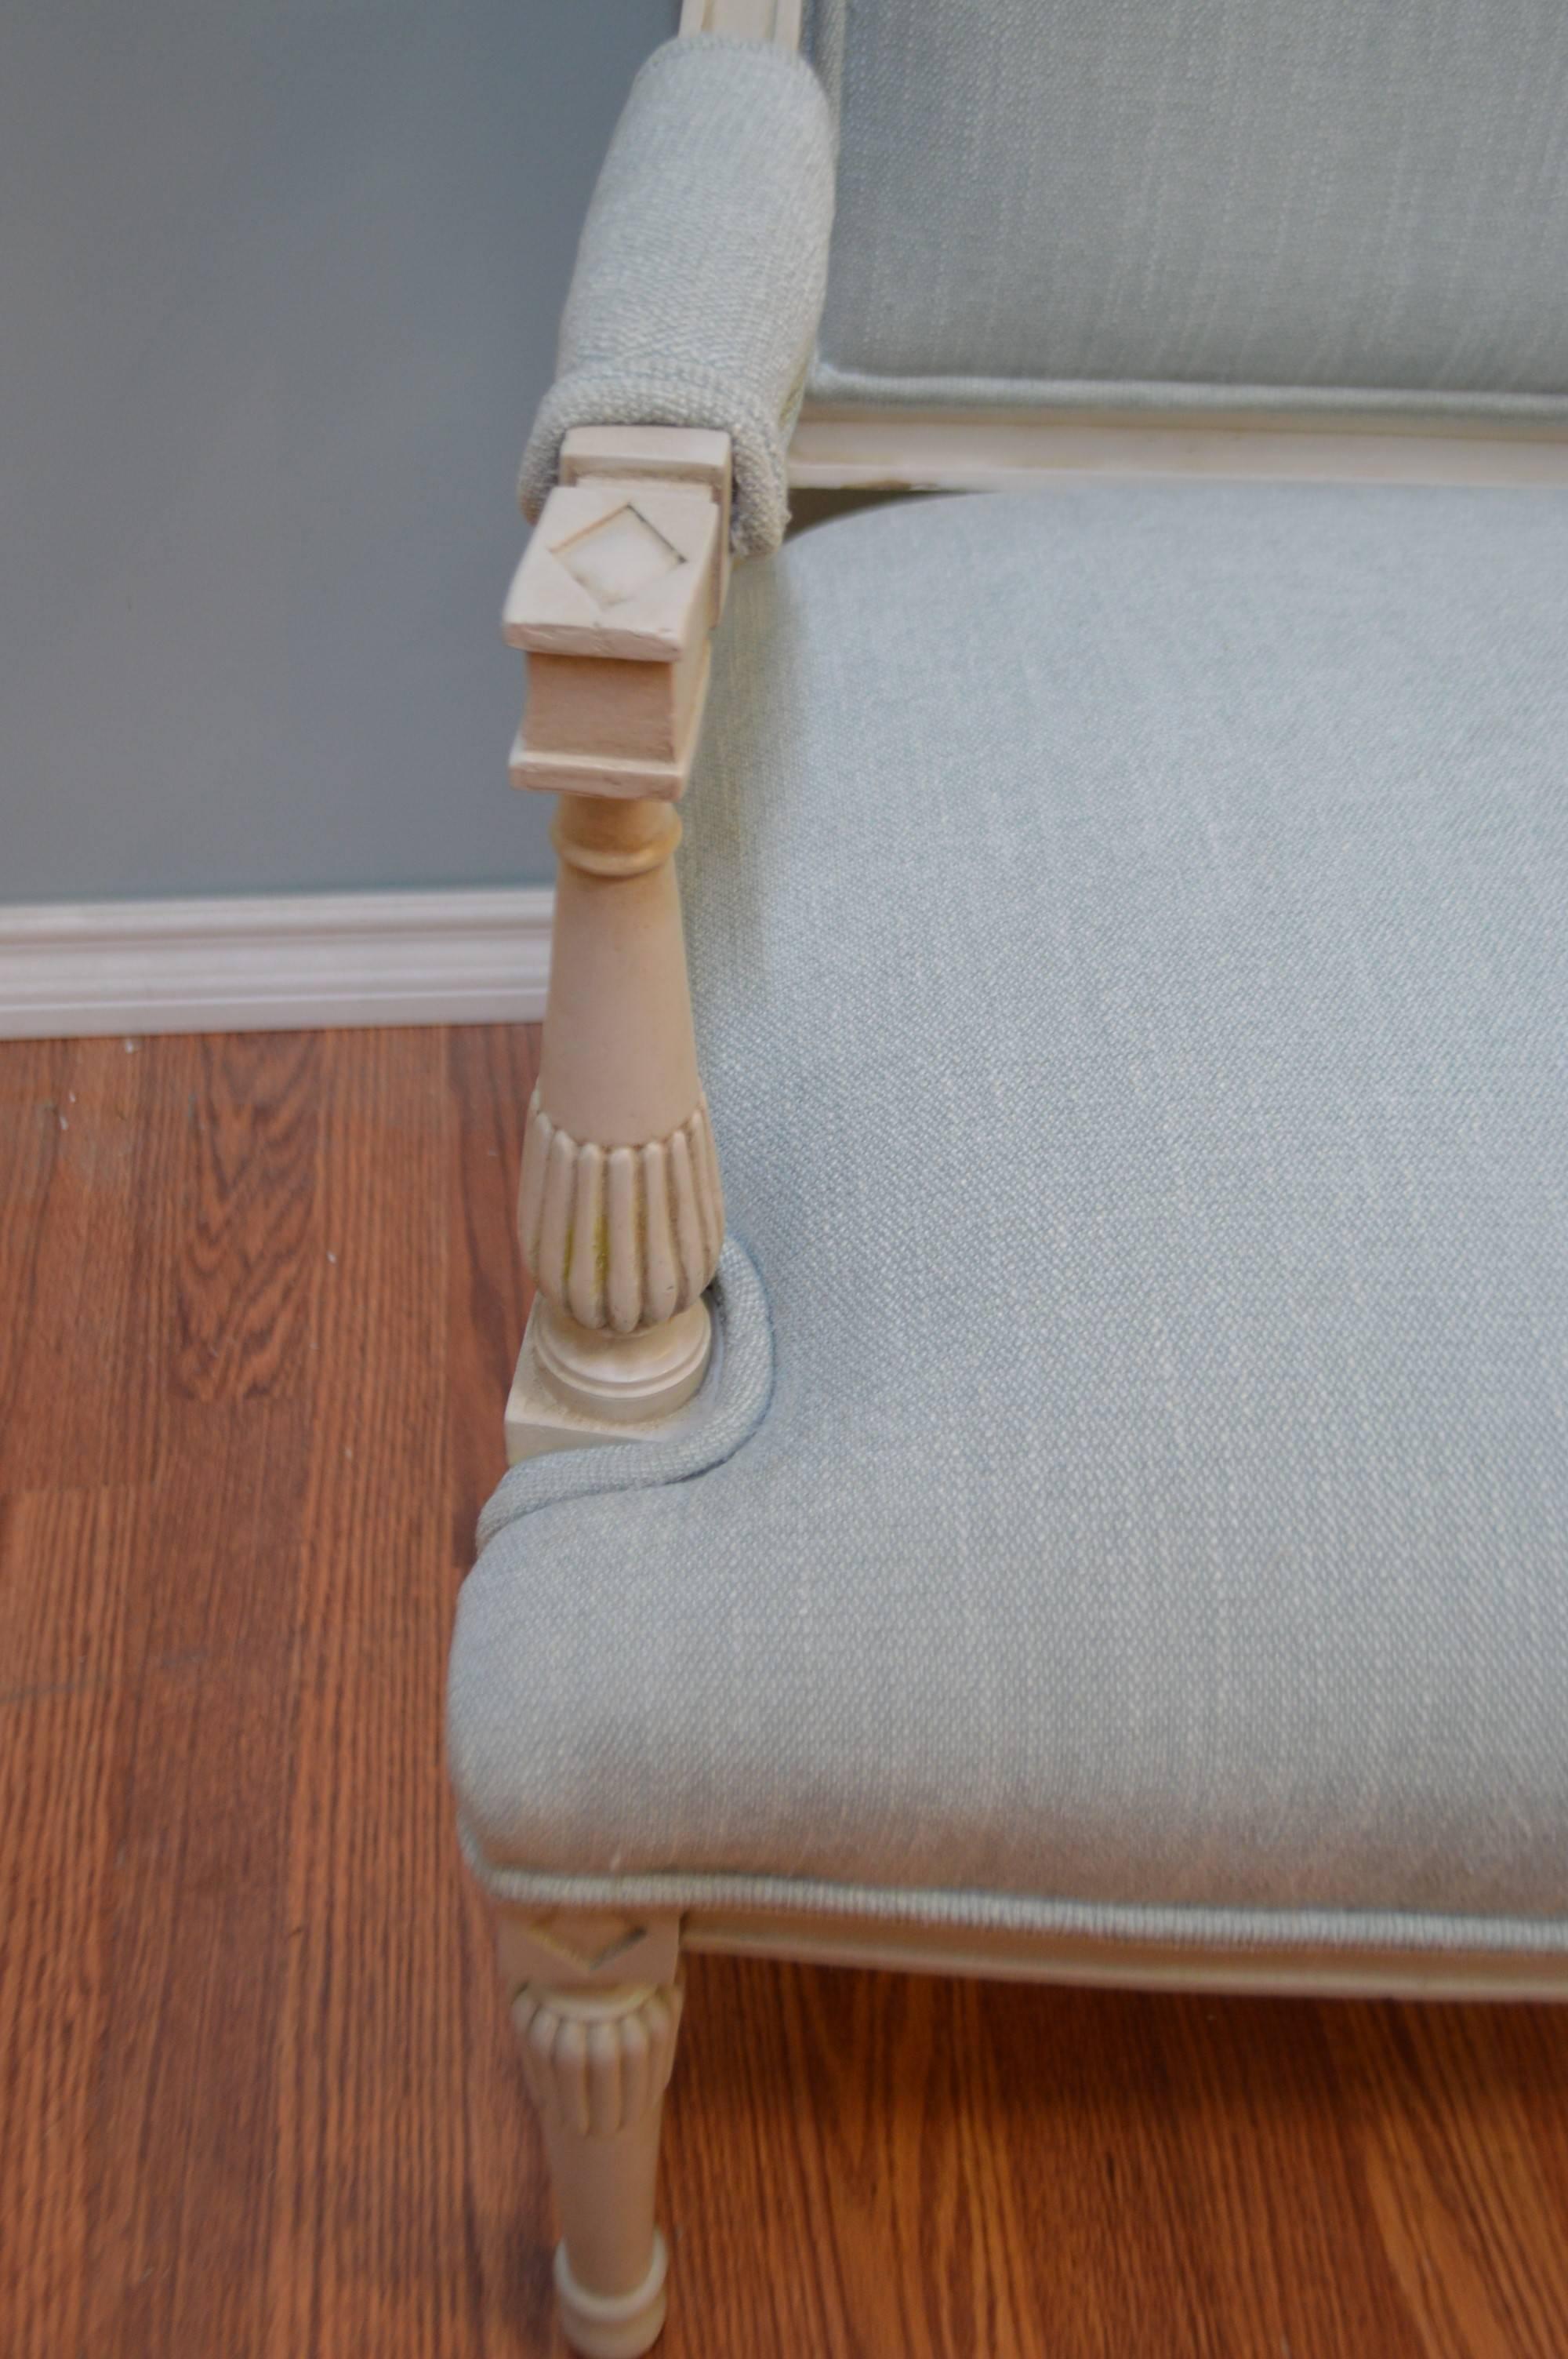 Elegant, Gustavian style painted in a light gray brushed linen. The linen is soft to the touch and a lovely light blue tone. The tight seat is very comfortable.